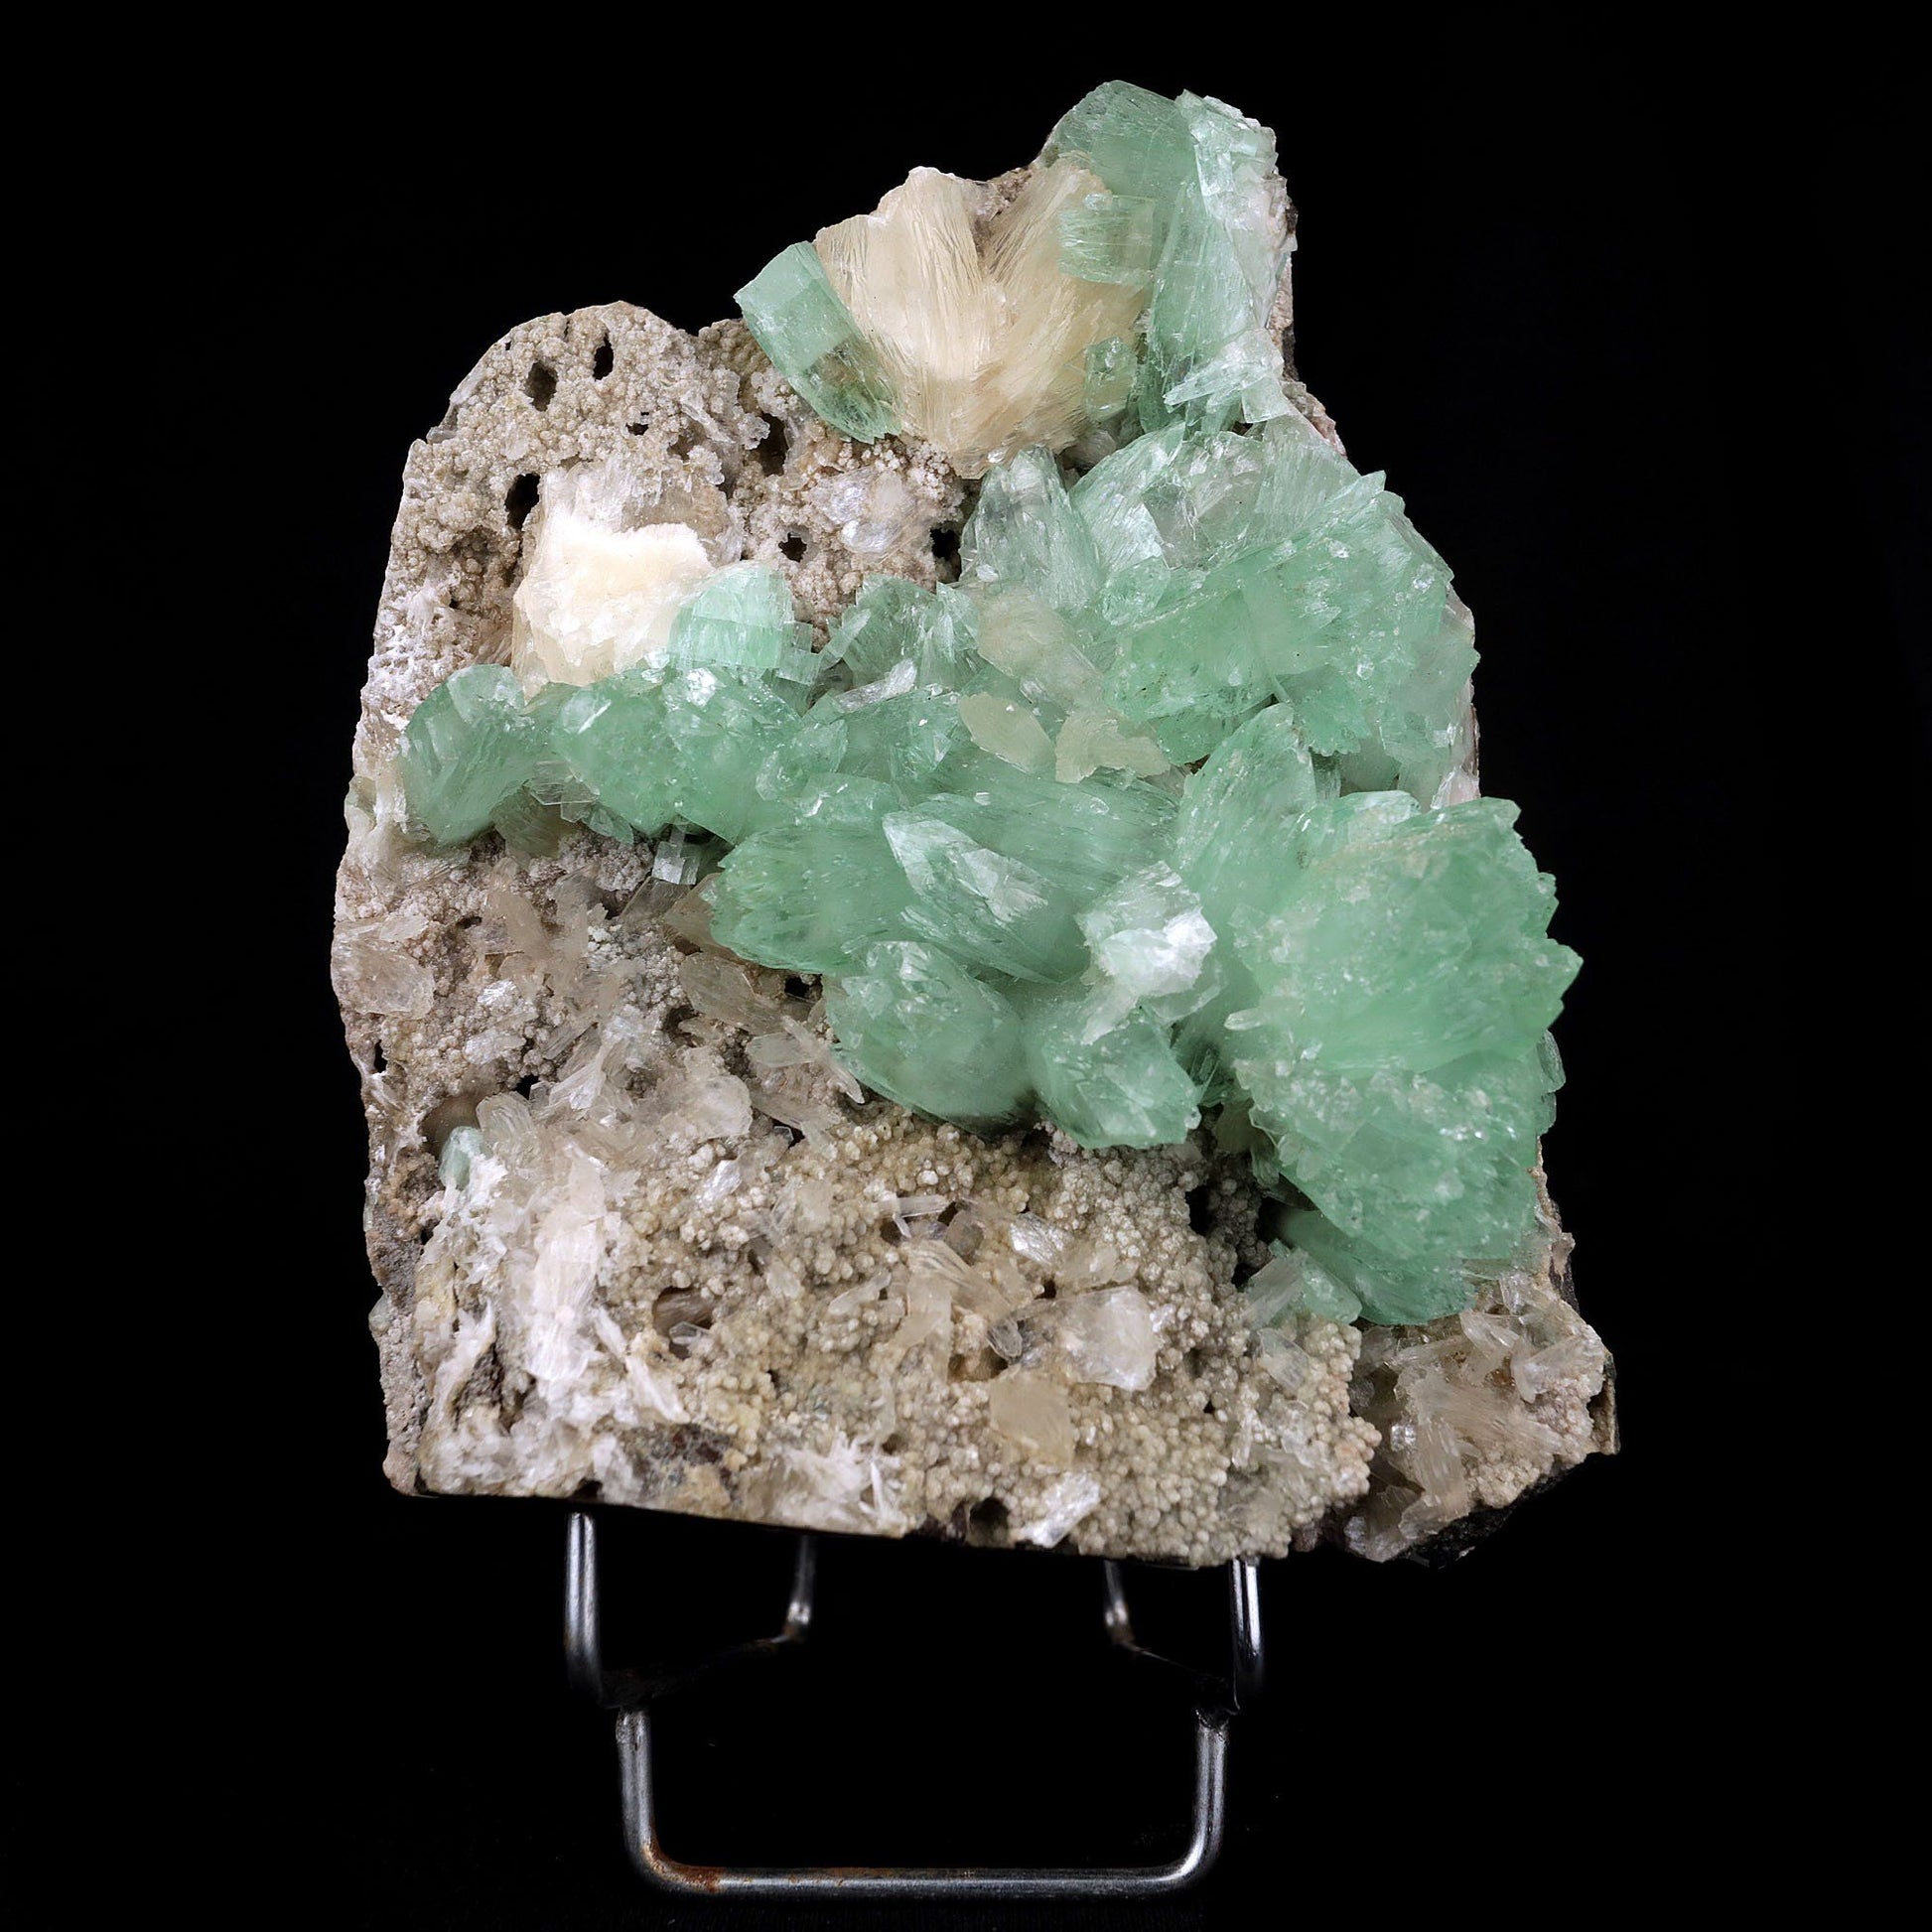 Apophyllite Green Crystal with Stilbite Natural Mineral Specimen # B3716 https://www.superbminerals.us/products/apophyllite-green-crystal-with-stilbite-natural-mineral-specimen-b-3716 A very aesthetic piece featuring a matrix densely coated with miniature, Stilbite crystals with a couple of lustrous, larger light Stilbite crystals on matrix, all hosting a line of transparent, mint-green Apophyllite pseudocubic (rectangular) crystals ascending to the top of the piece. Great contrast,